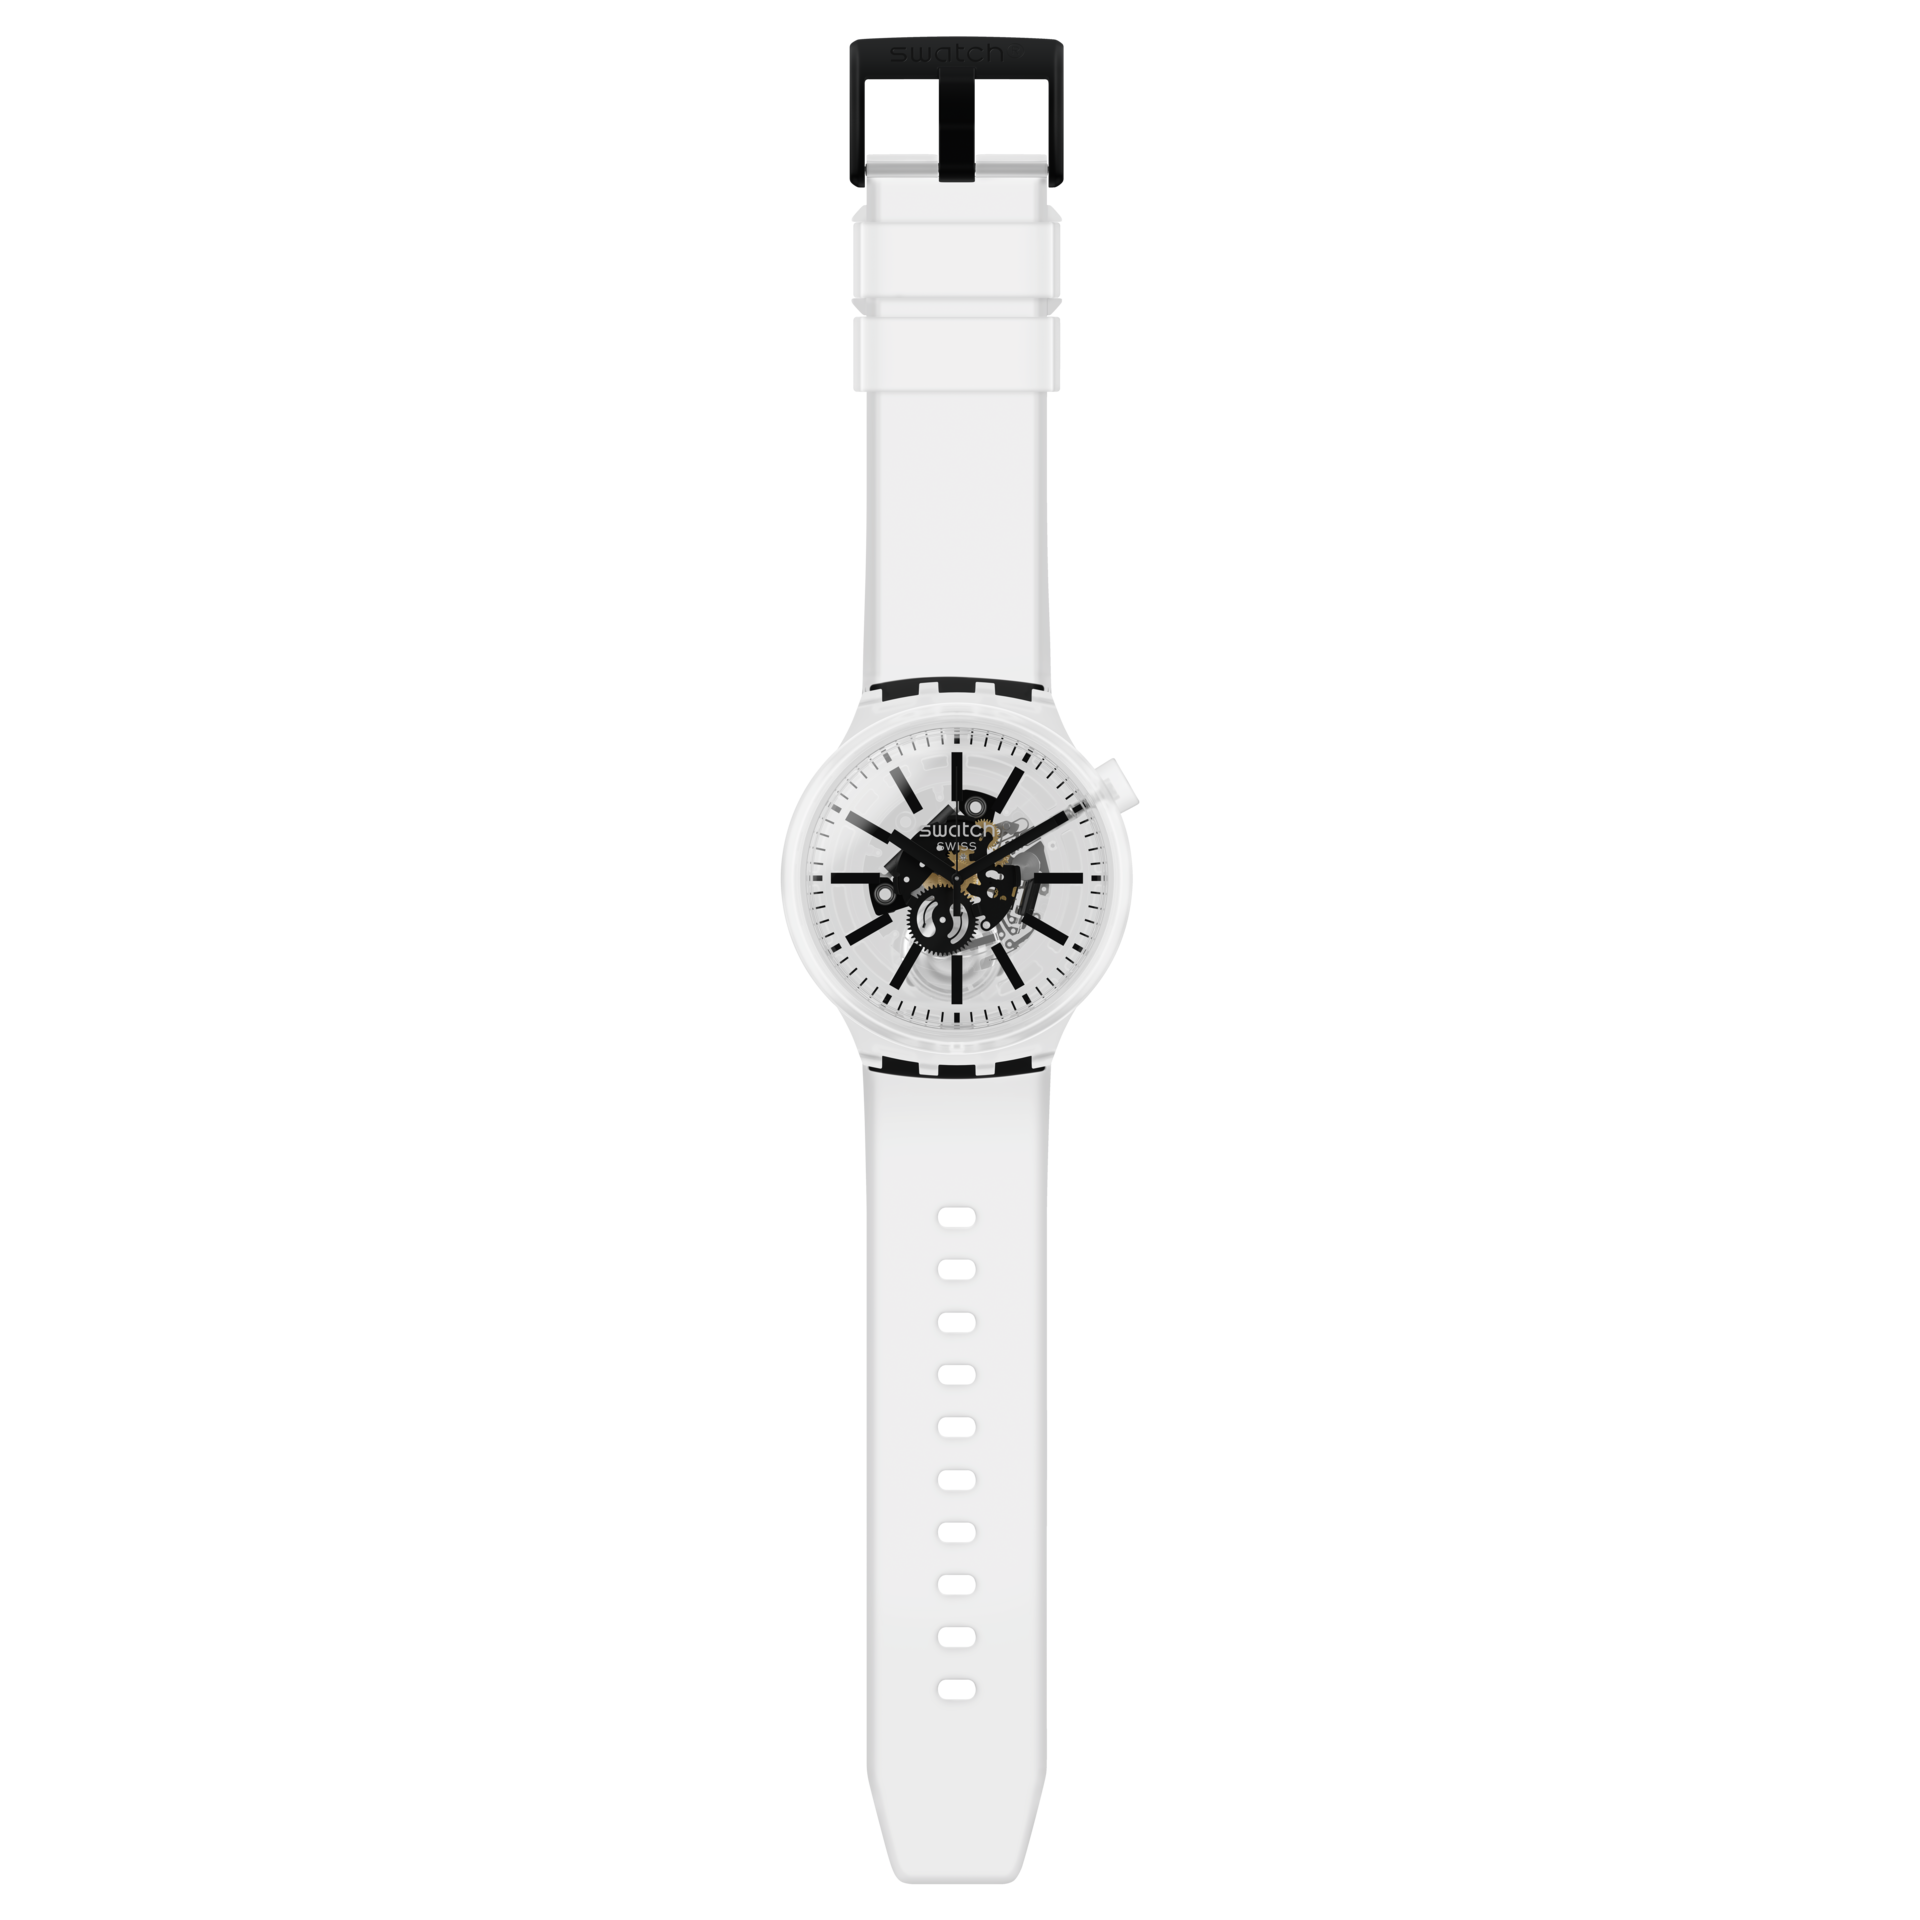 Swatch SO27M101 - In stock. Official Swatch UK retailer. The Swatch  SO27M101 comes with free delivery, 2 year guarantee, 30 da…